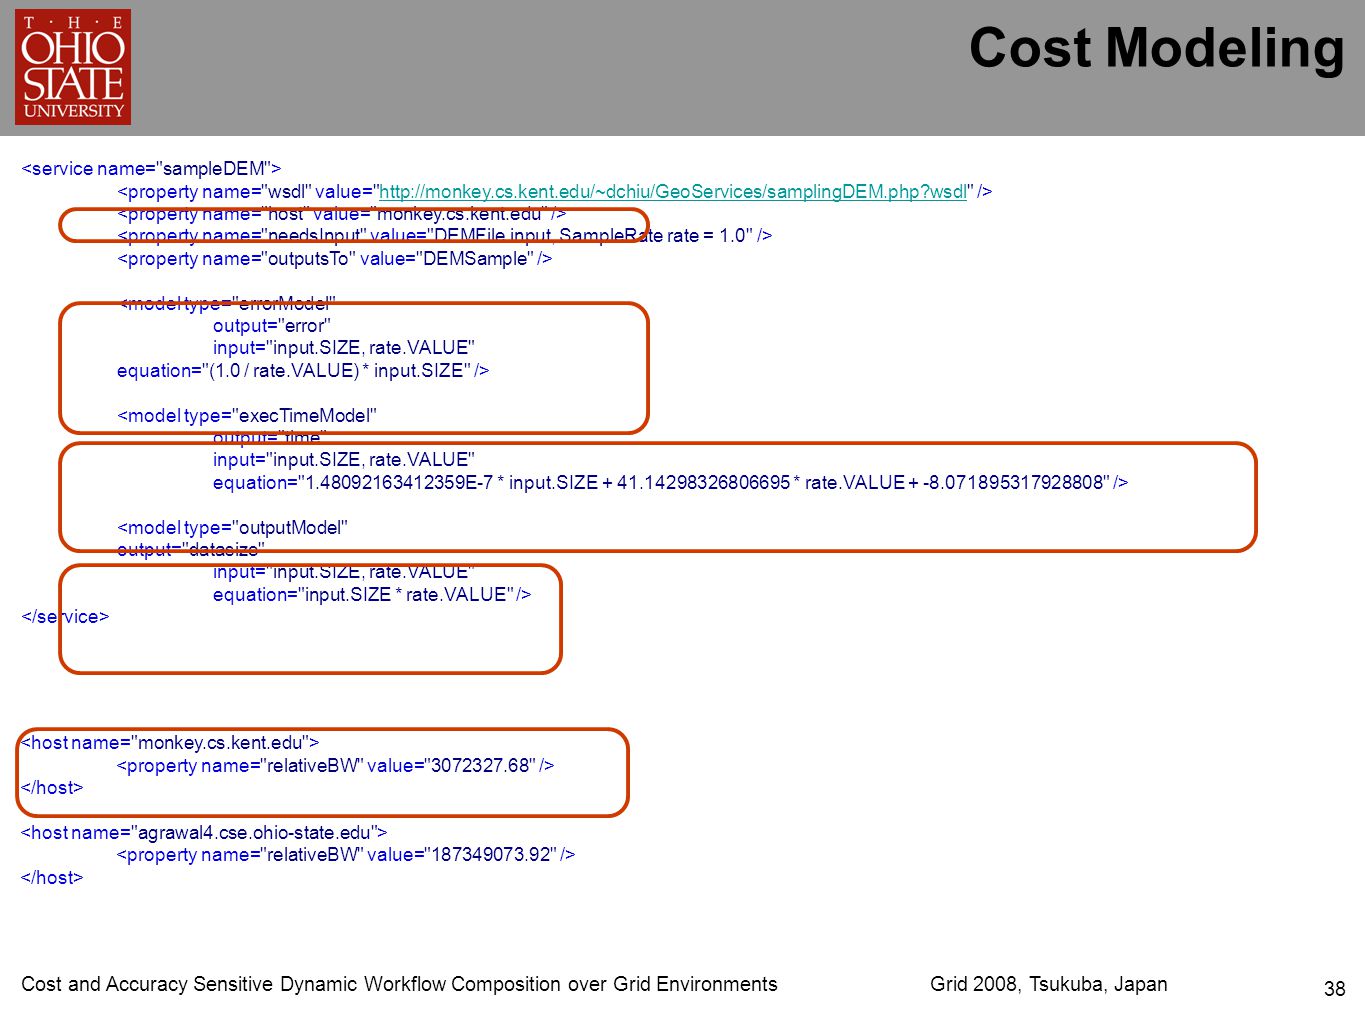 Cost and Accuracy Sensitive Dynamic Workflow Composition over Grid EnvironmentsGrid 2008, Tsukuba, Japan 38 Cost Modeling   wsdl <model type= errorModel output= error input= input.SIZE, rate.VALUE equation= (1.0 / rate.VALUE) * input.SIZE /> <model type= execTimeModel output= time input= input.SIZE, rate.VALUE equation= E-7 * input.SIZE * rate.VALUE /> <model type= outputModel output= datasize input= input.SIZE, rate.VALUE equation= input.SIZE * rate.VALUE />